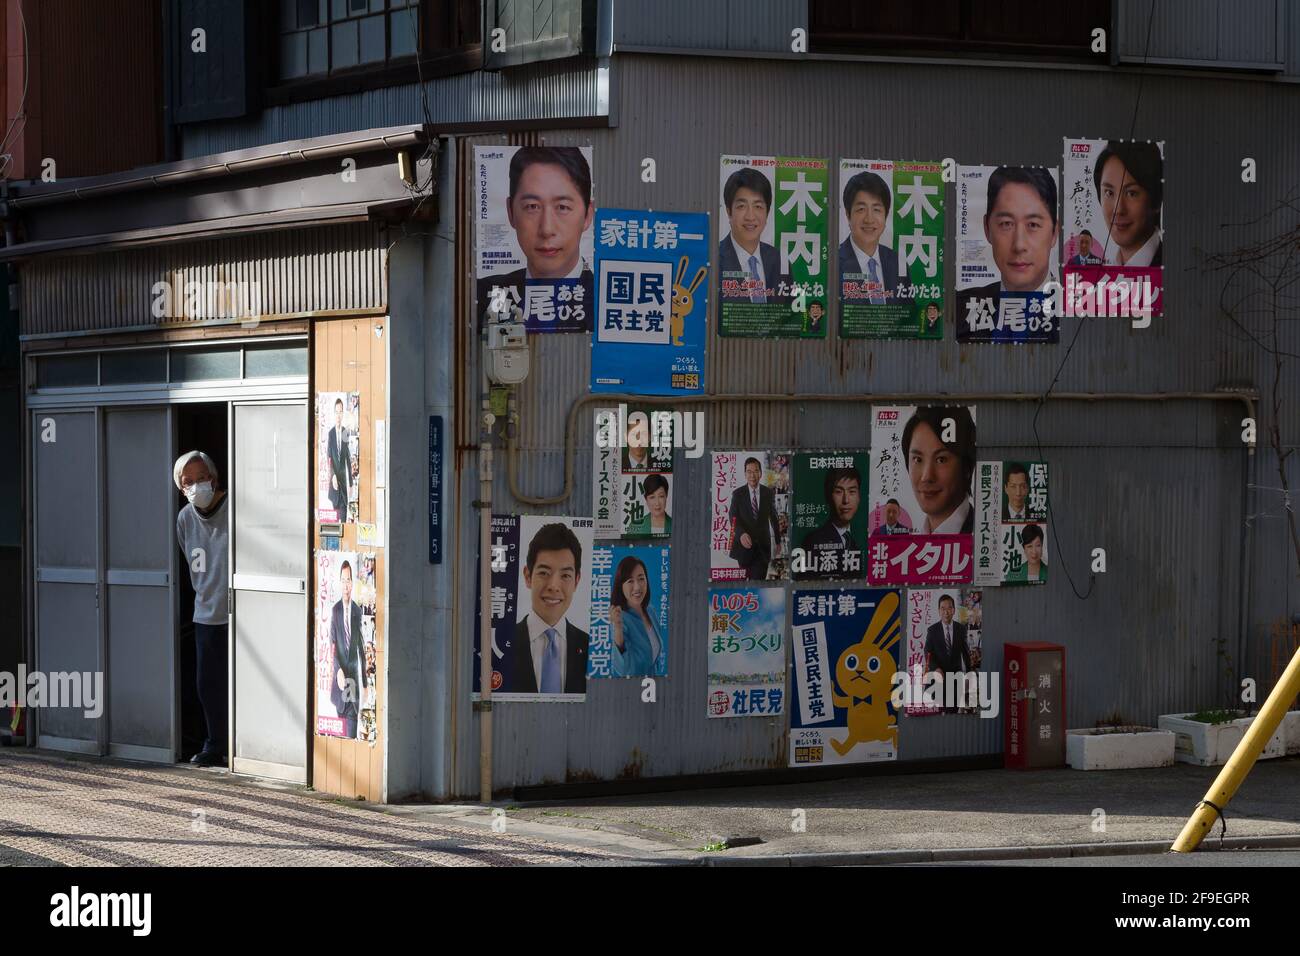 An older Japanese man looks out of a building with many political posters on its side. Ueno, Tokyo, Japan. Stock Photo